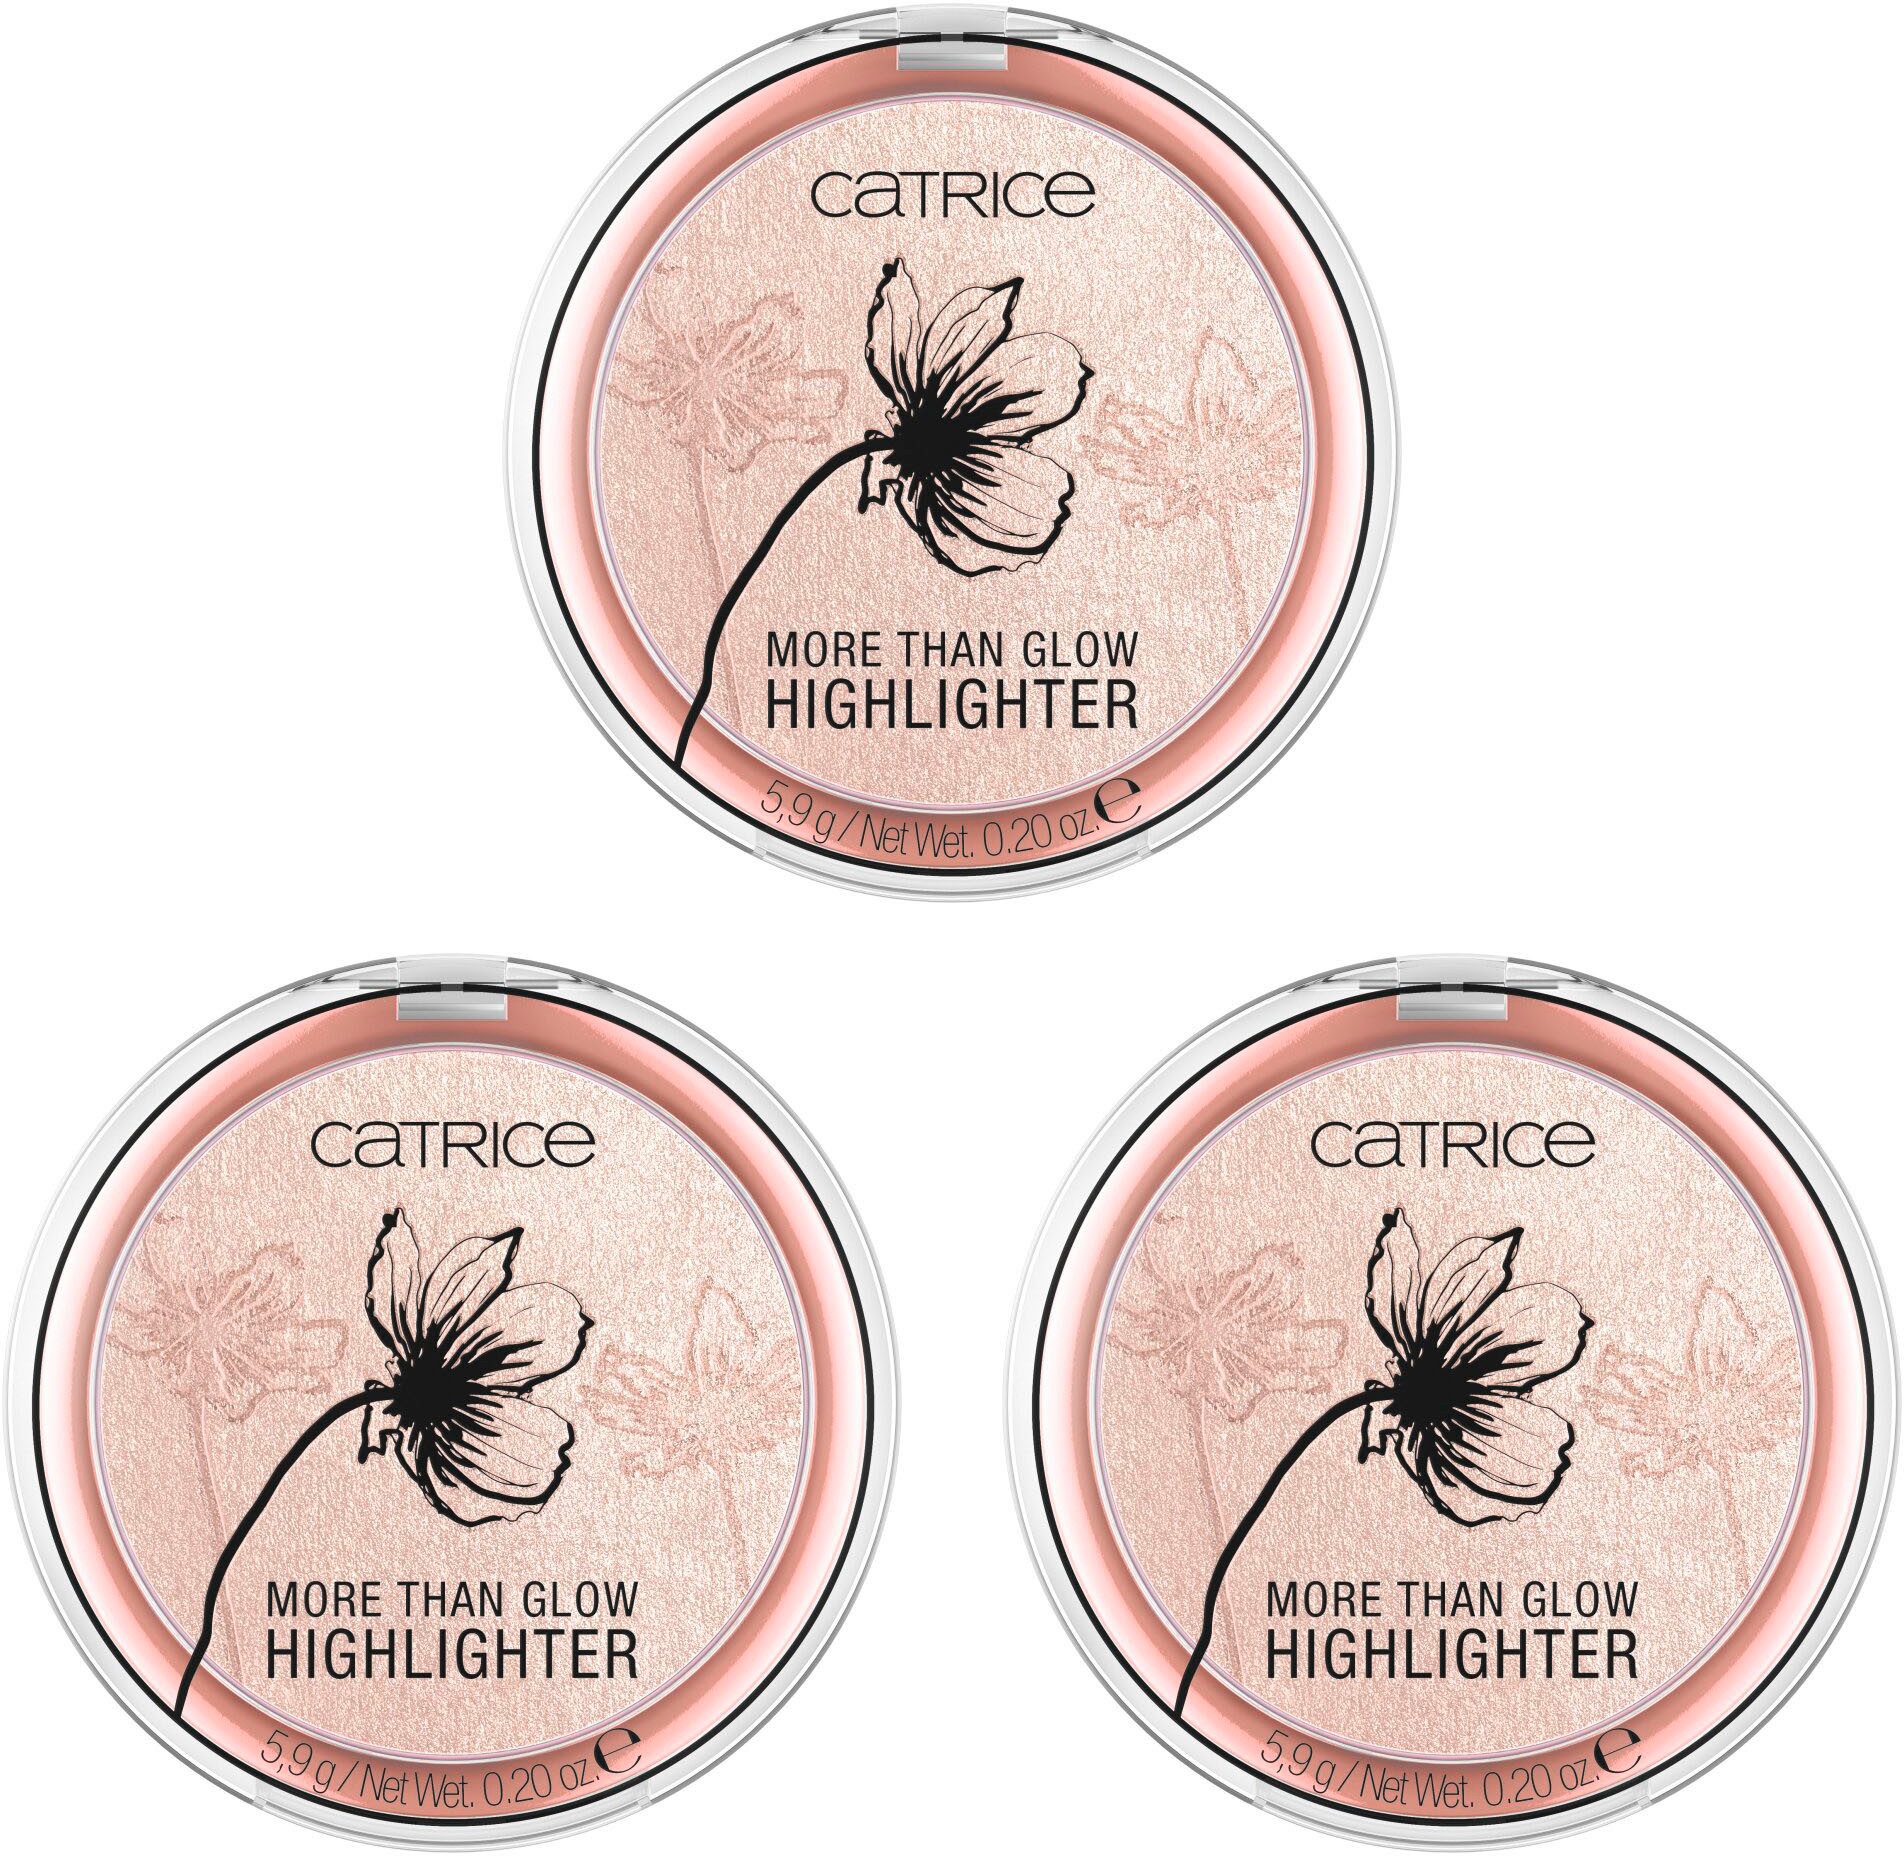 Catrice Highlighter More Than Glow Highlighter, 3-tlg.